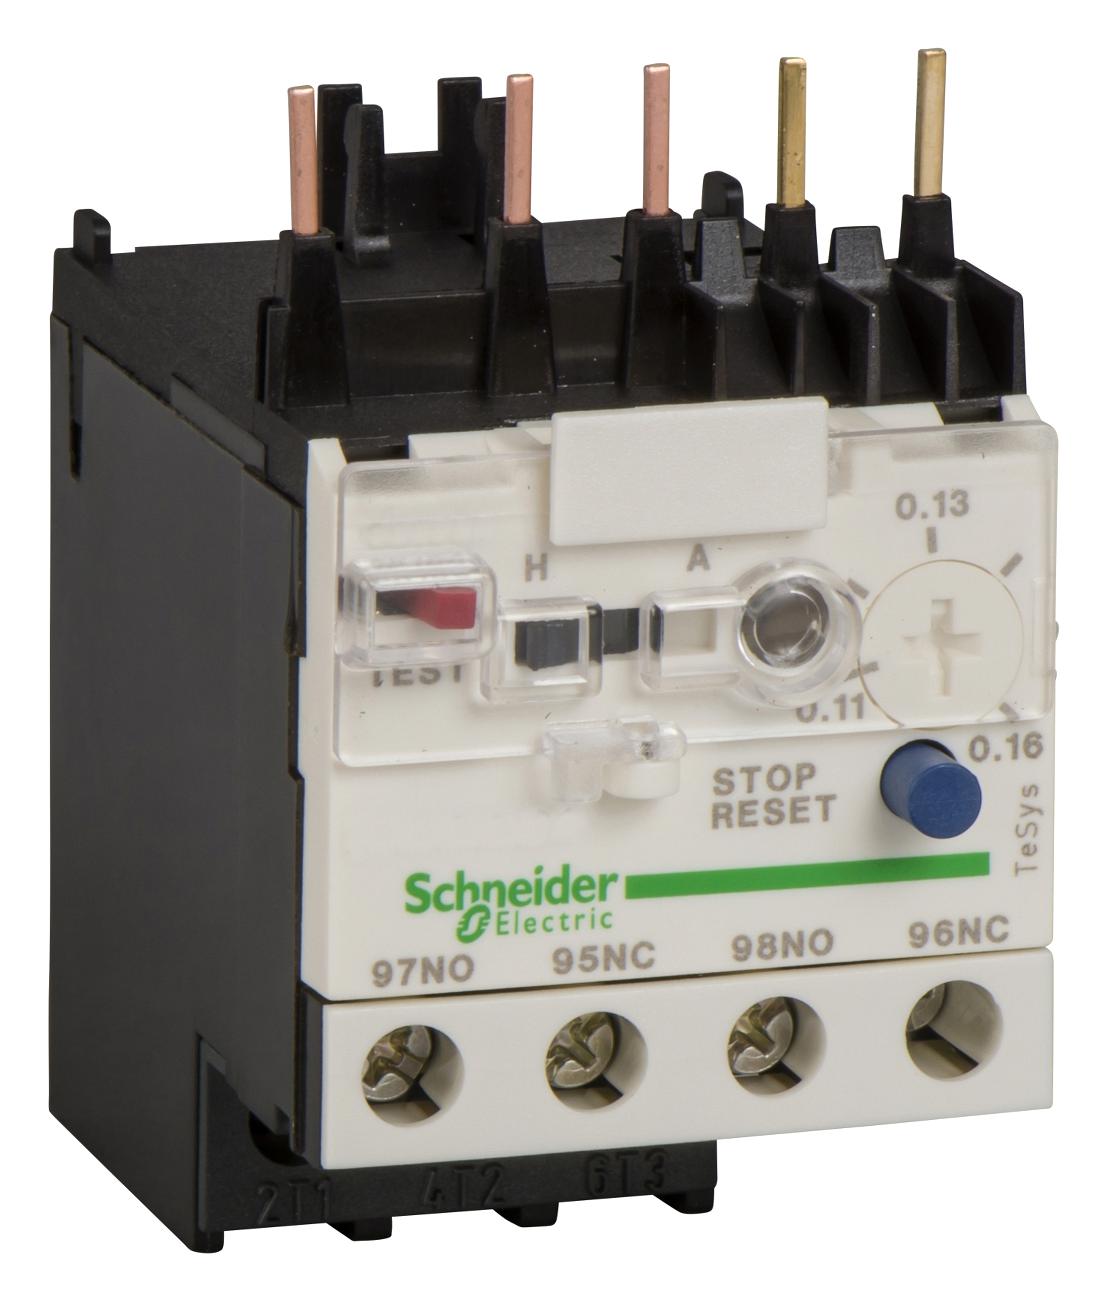 LR2K0322 THERMAL OVERLOAD RELAY, 16A, 690VAC SCHNEIDER ELECTRIC